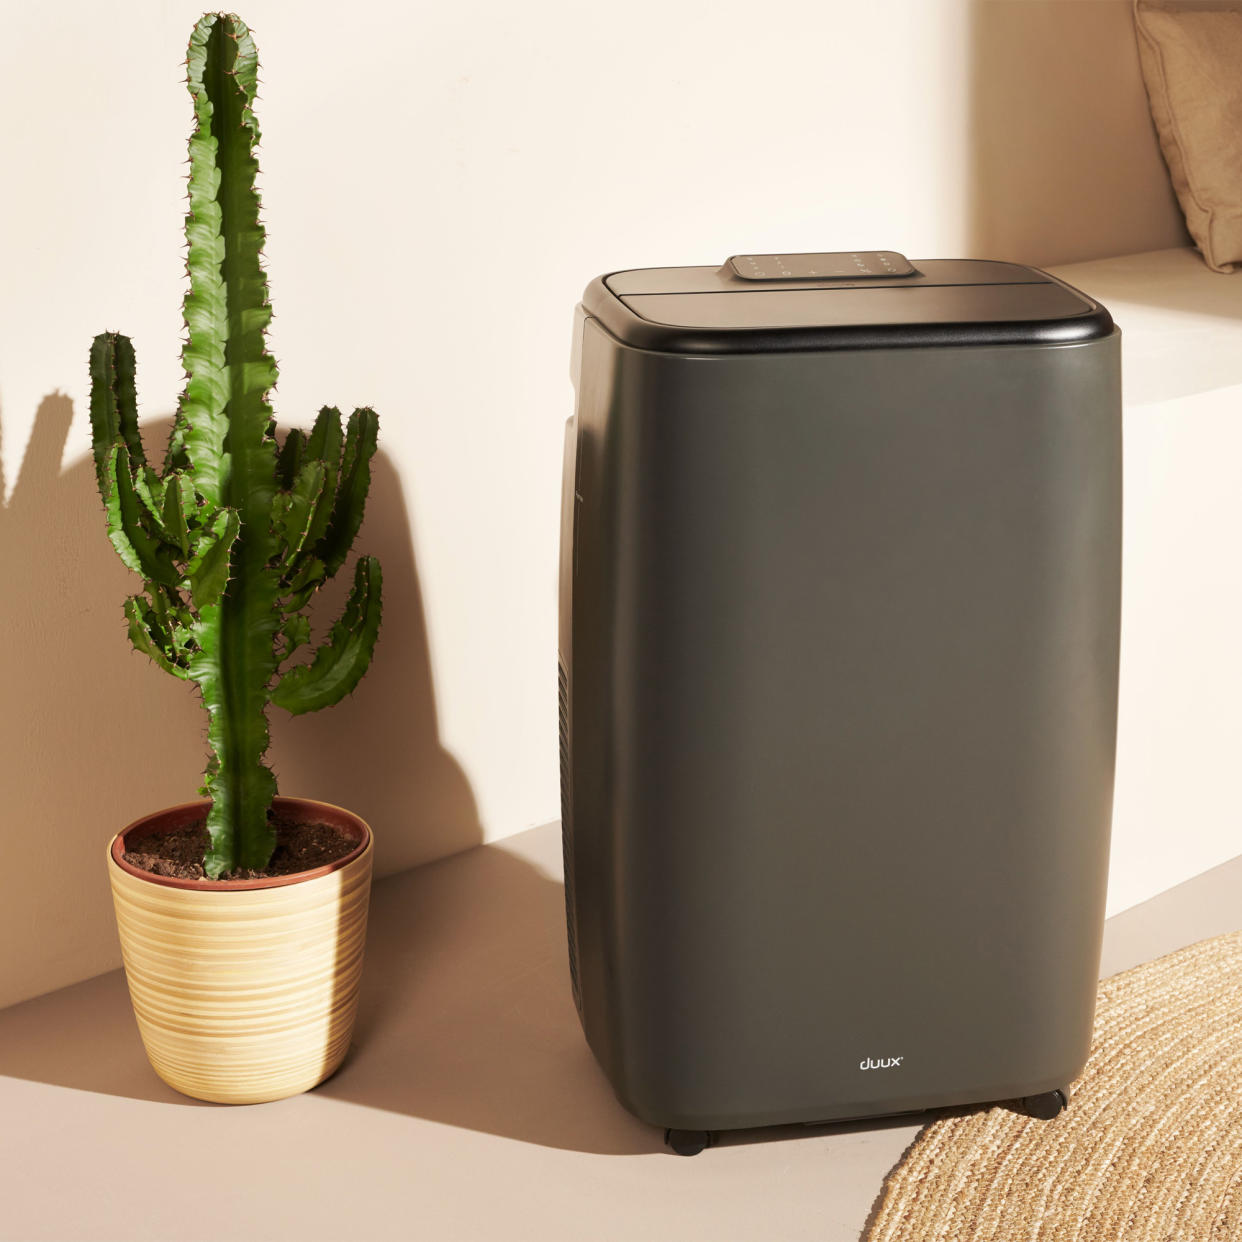  The dark grey Duux North 9K Smart Air Conditioner next to a cactus plant 